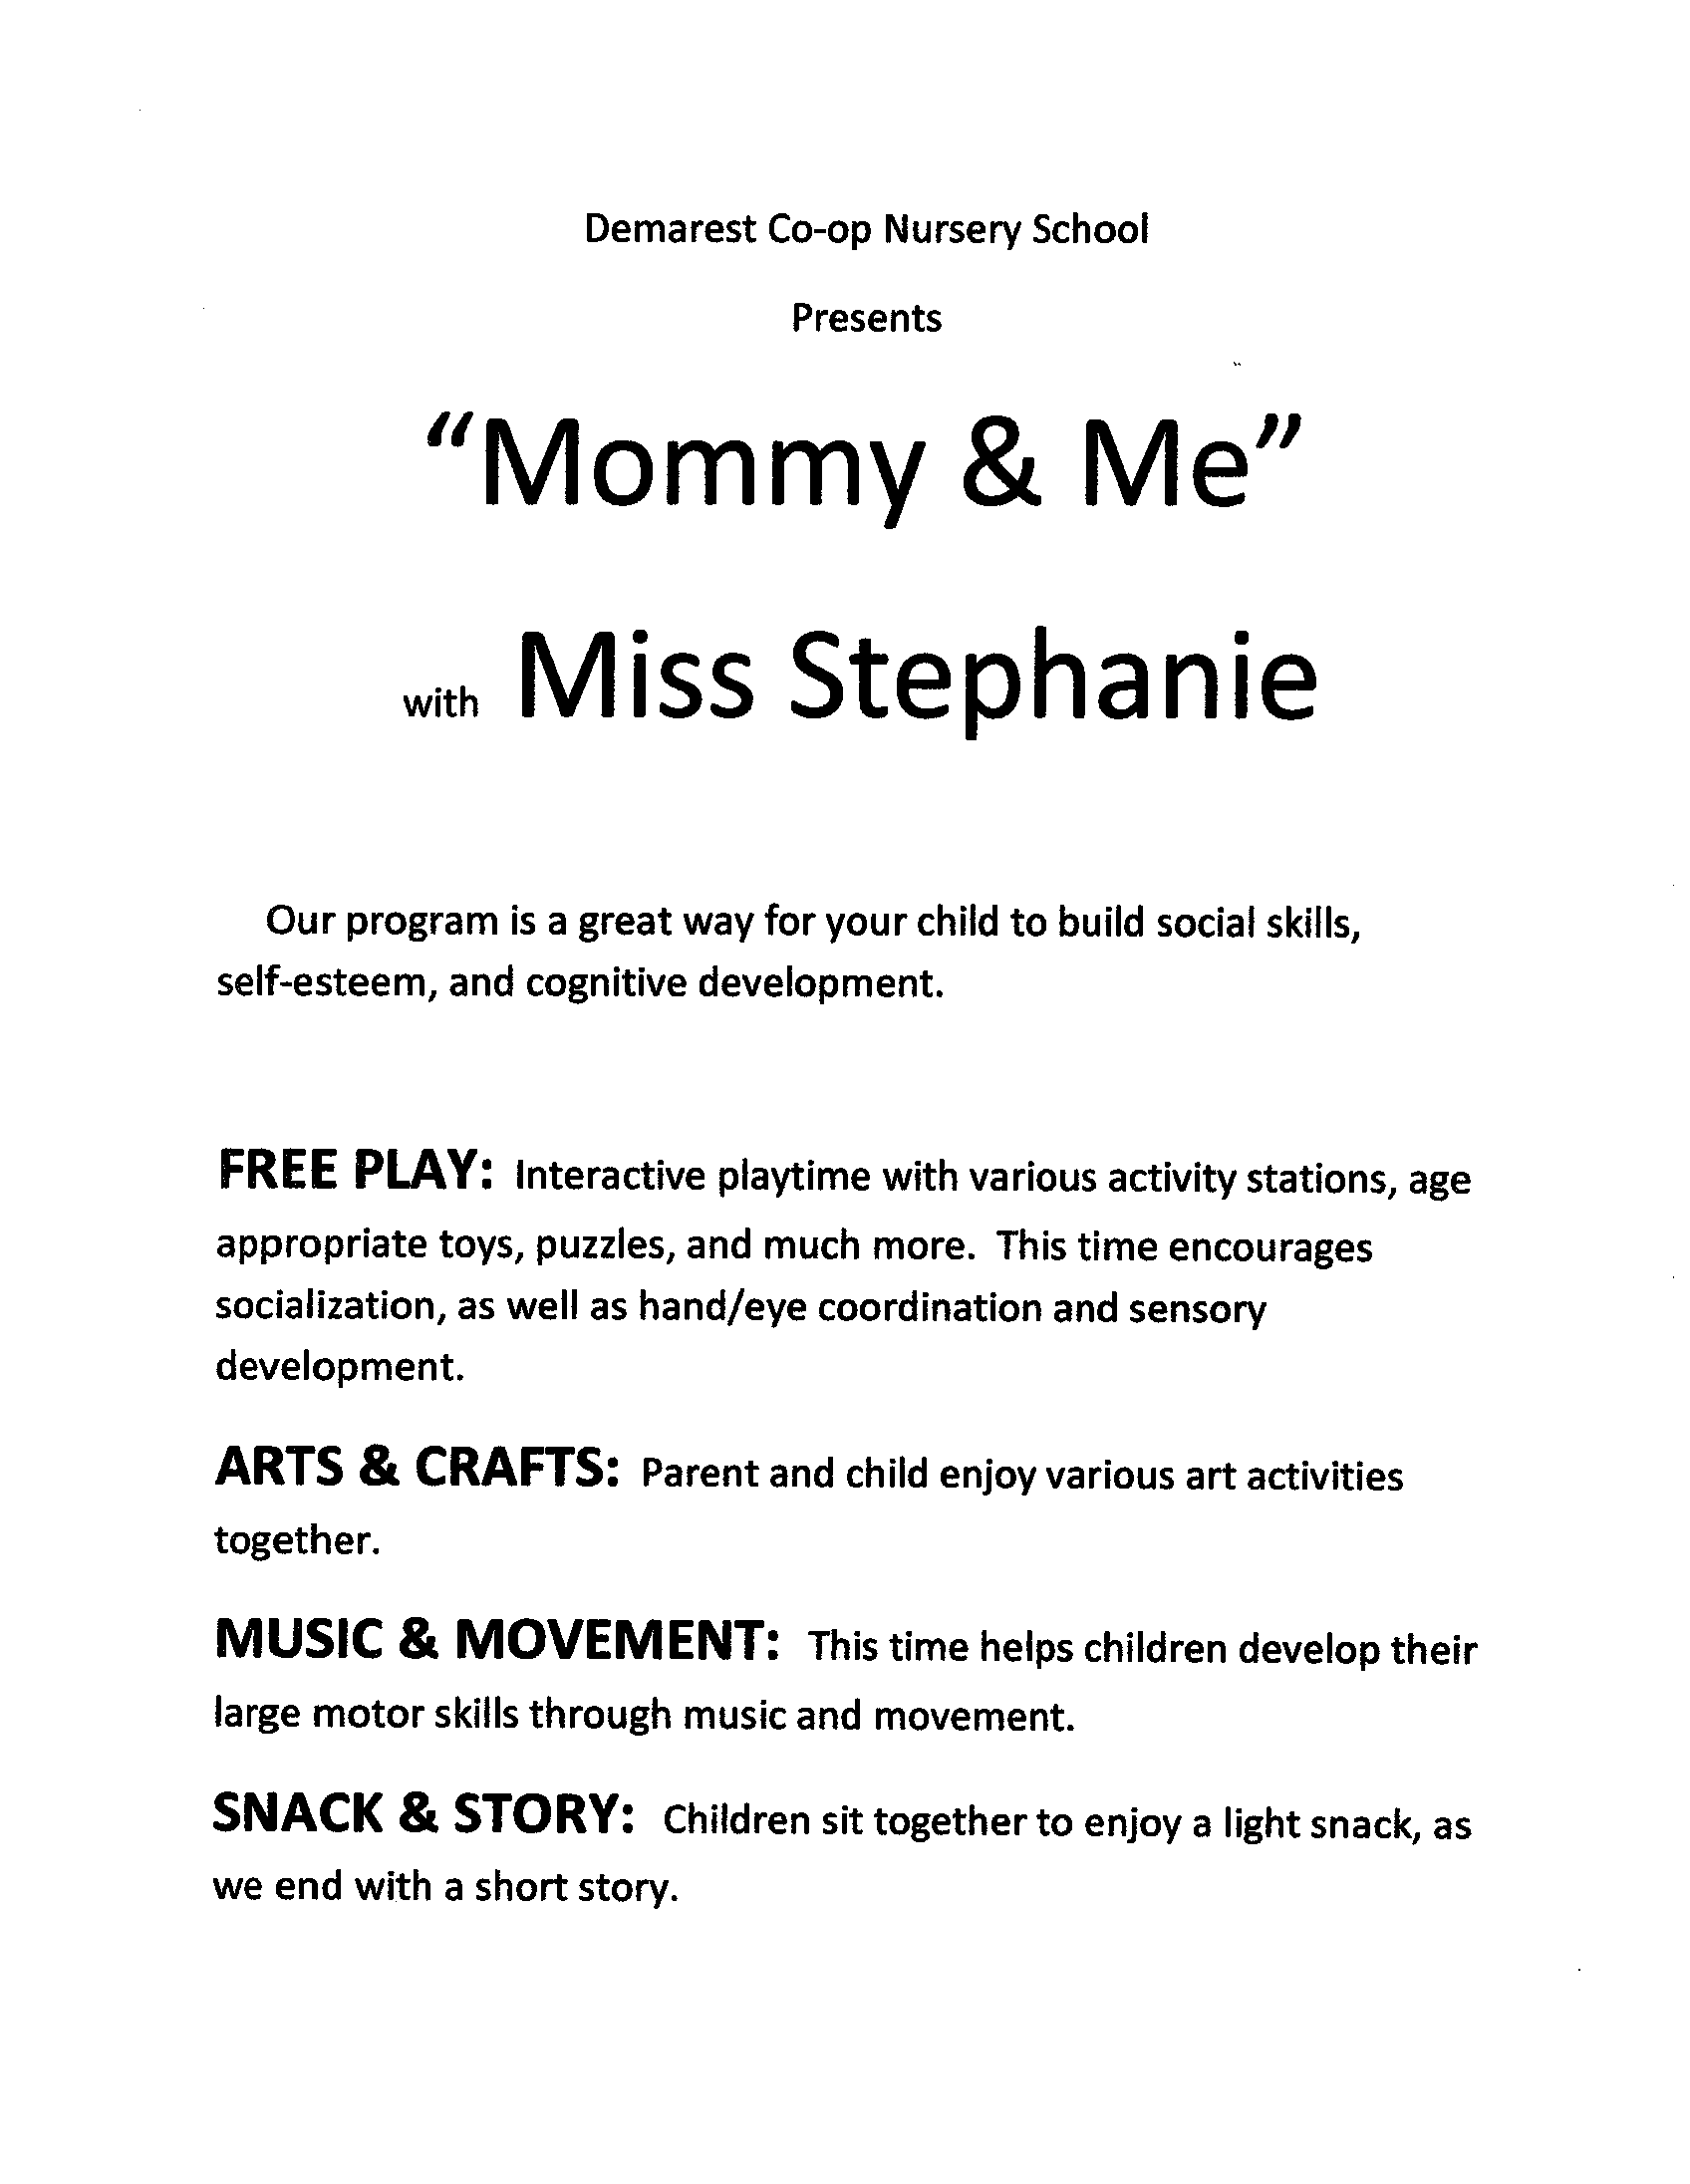 mommyme1617info